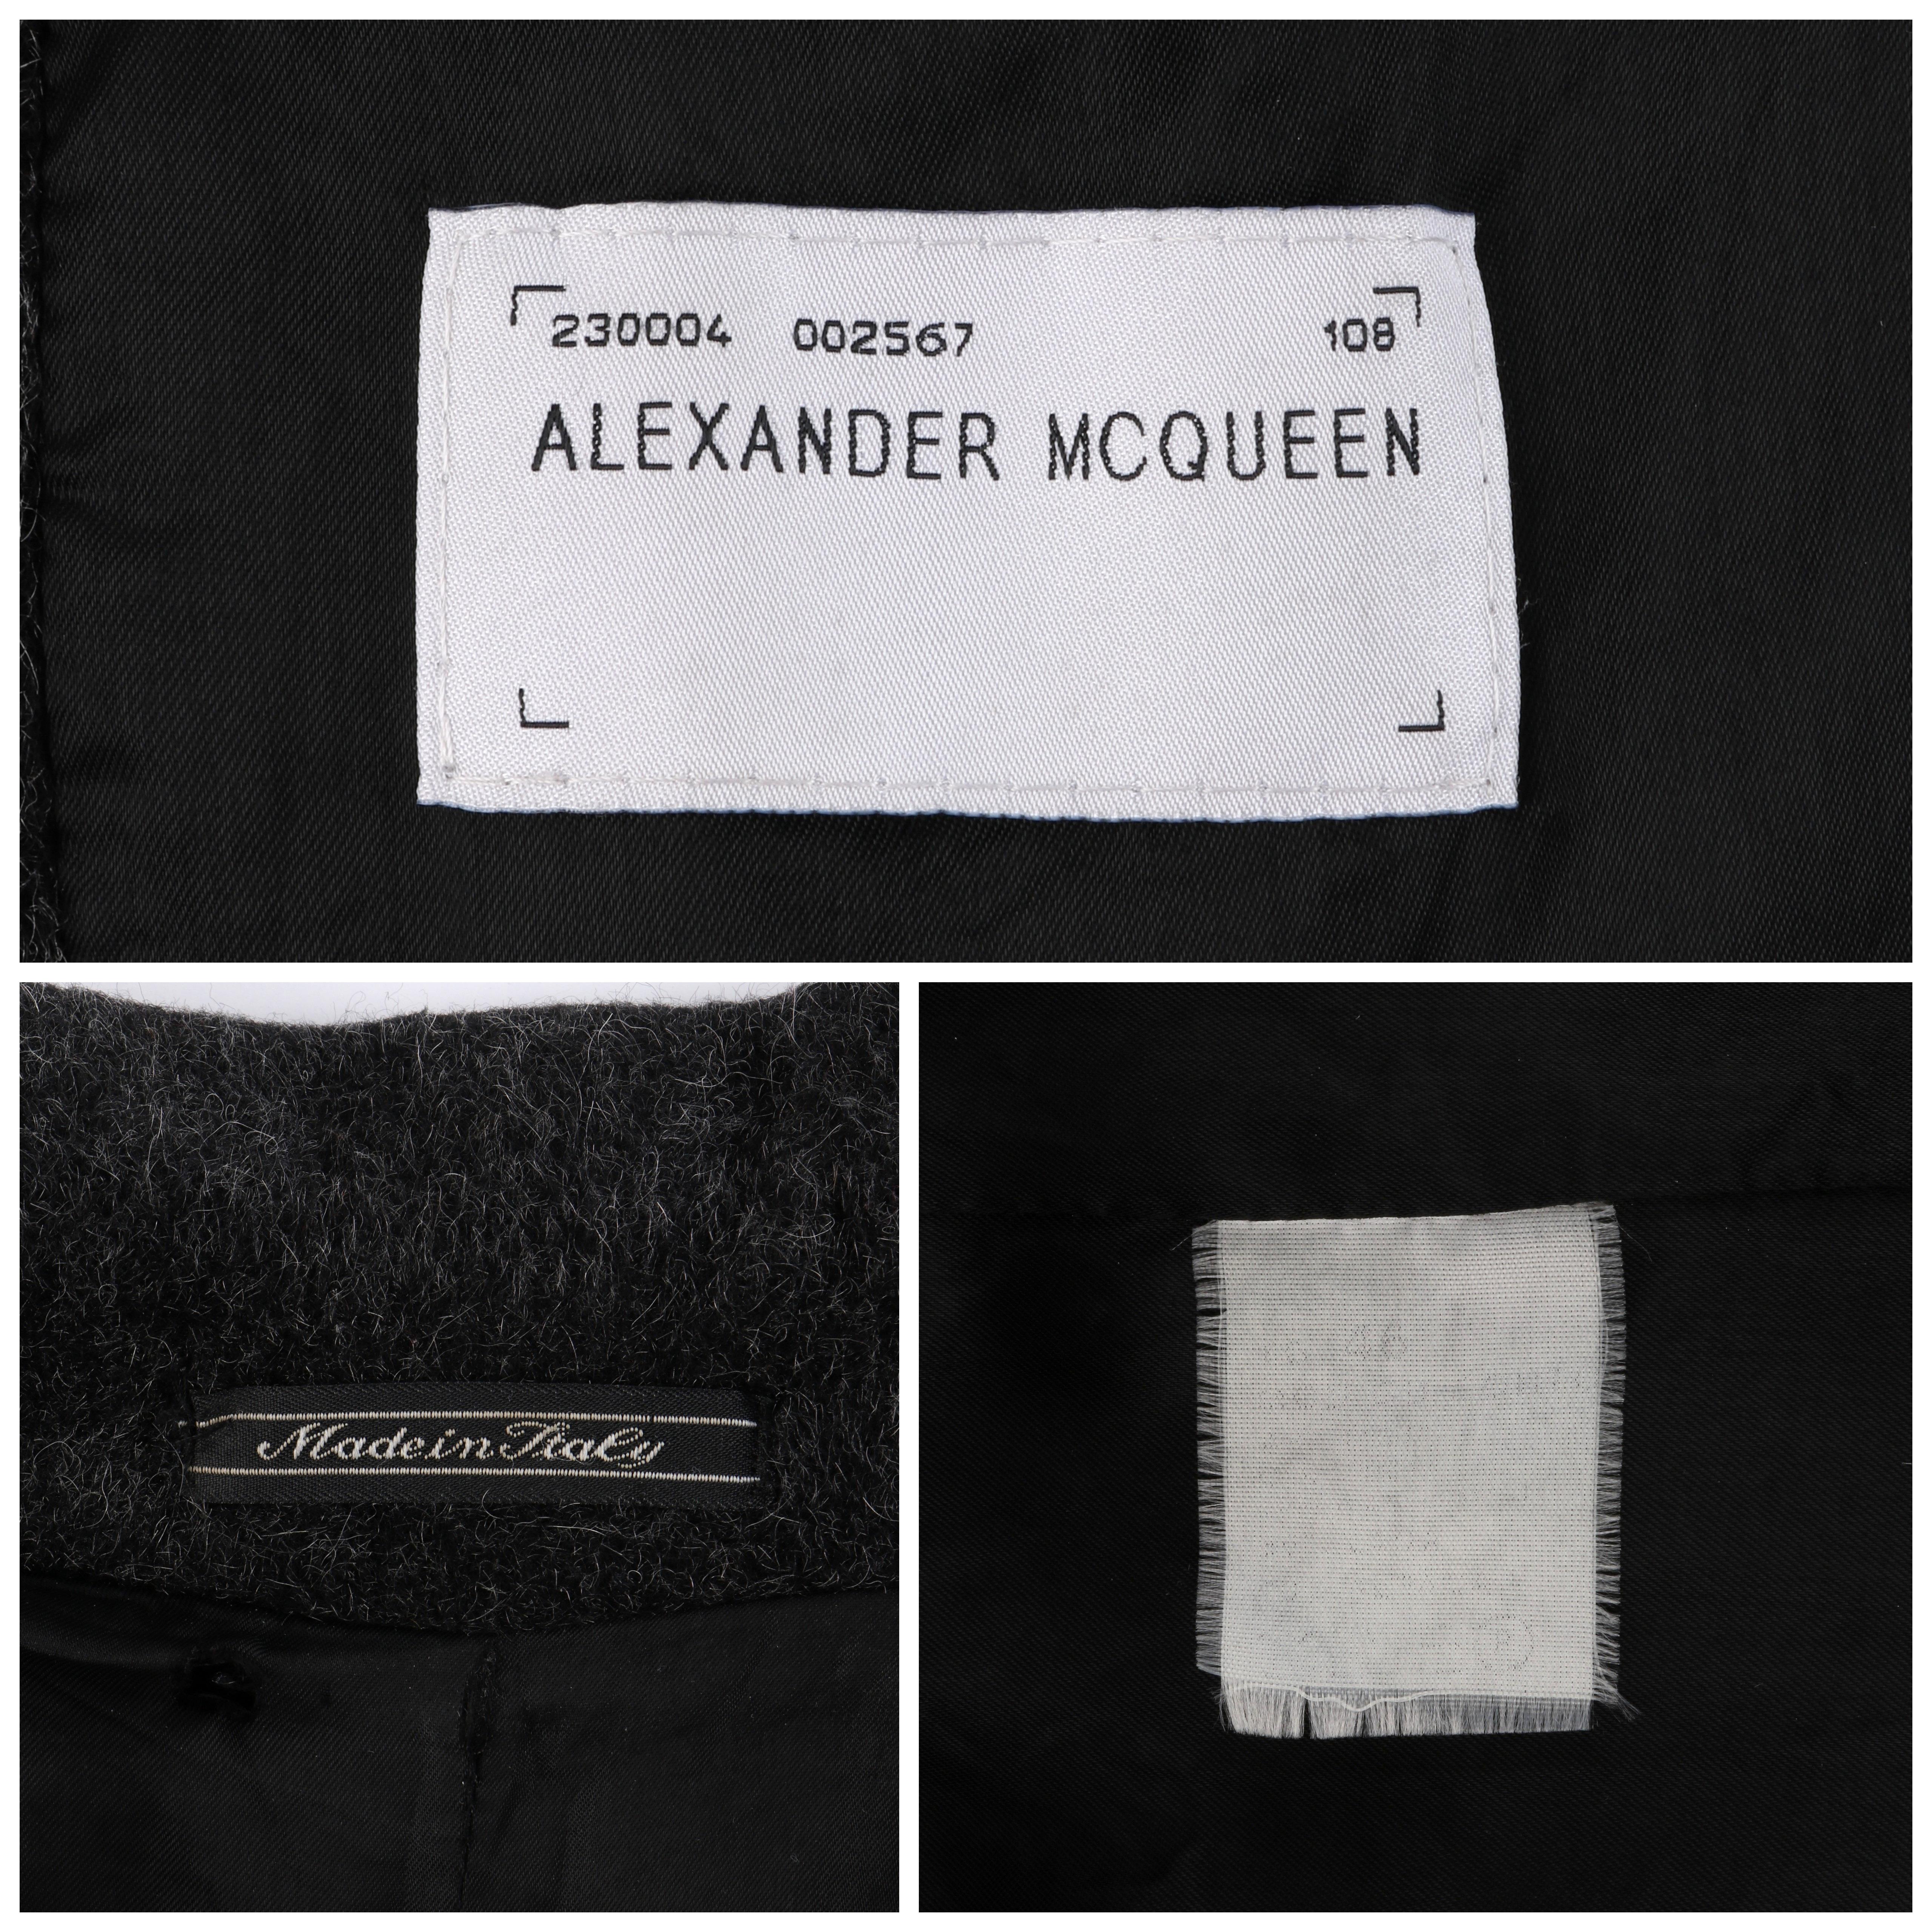 ALEXANDER McQUEEN A/W 1996 “Dante” Charcoal Gray Mohair Coat Button Up Overcoat  For Sale 1